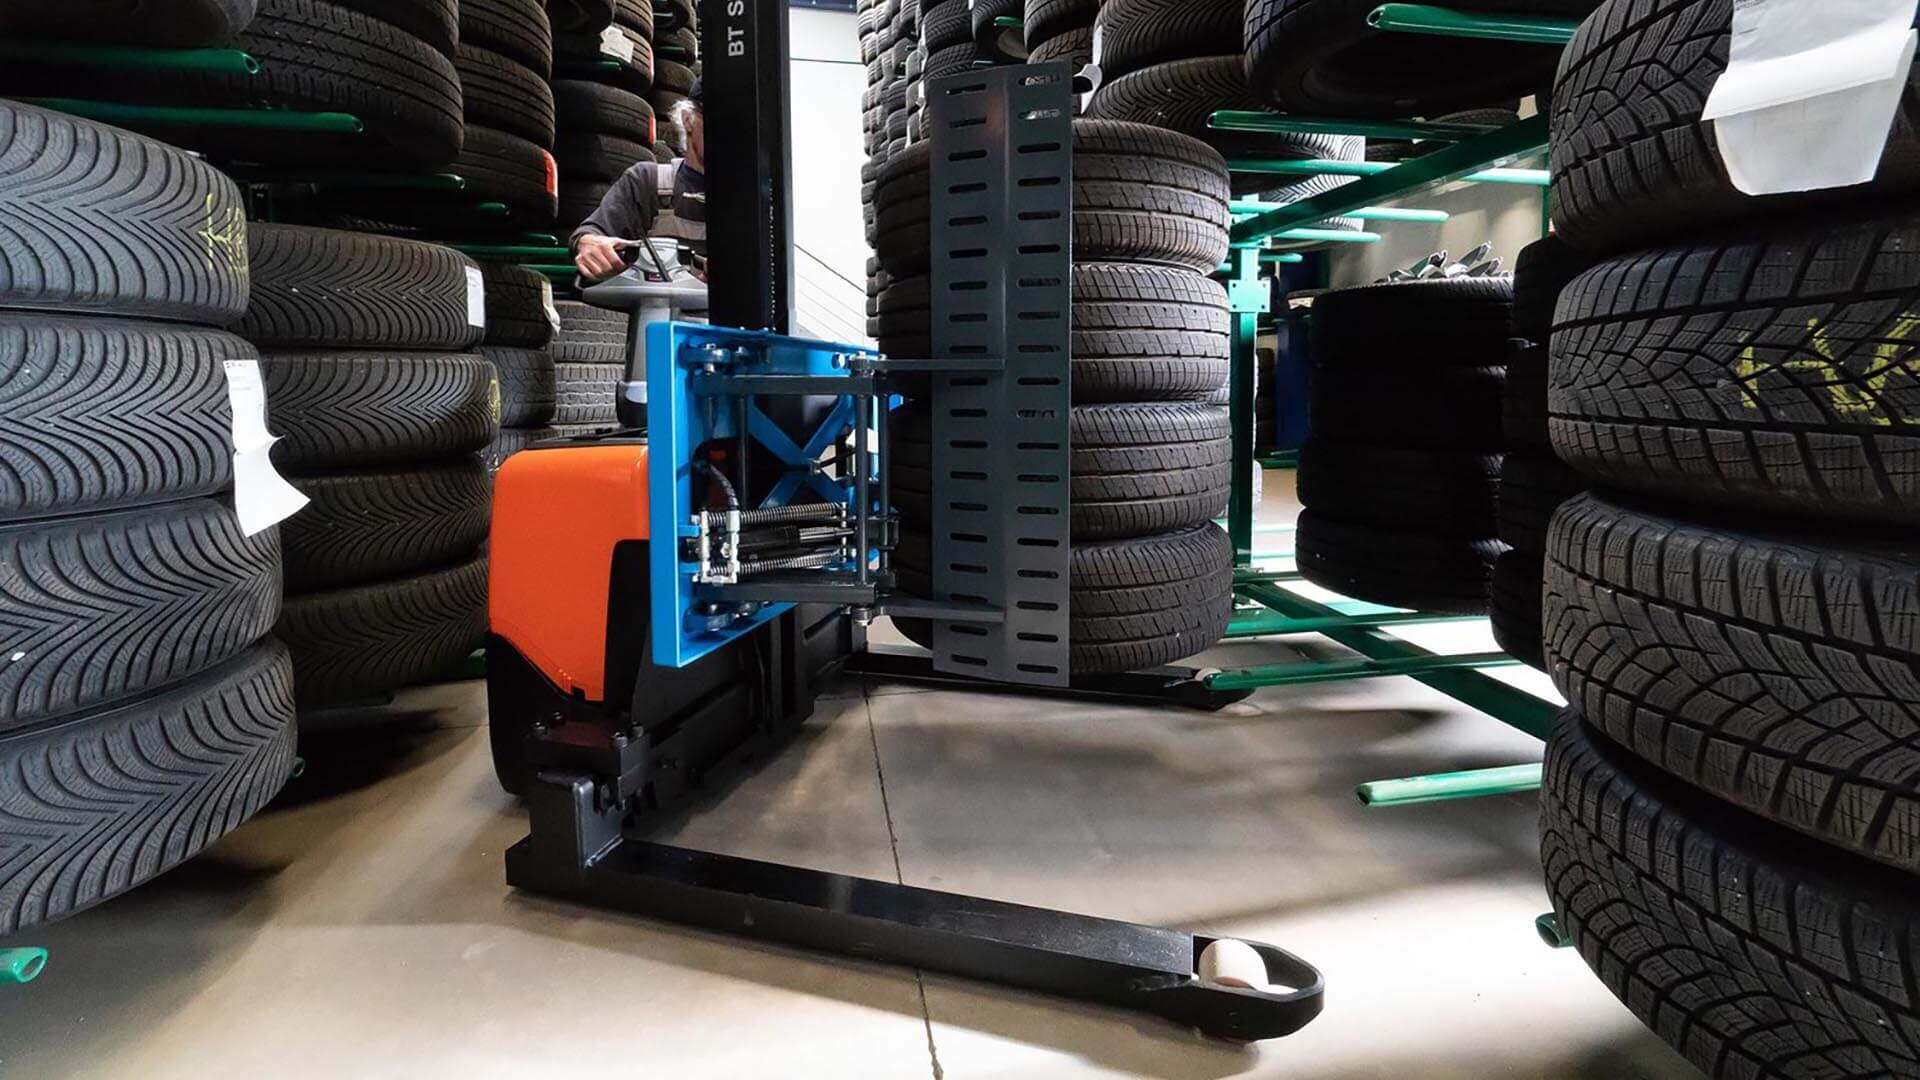 Easy Stacker 800 handles a stack car tyres